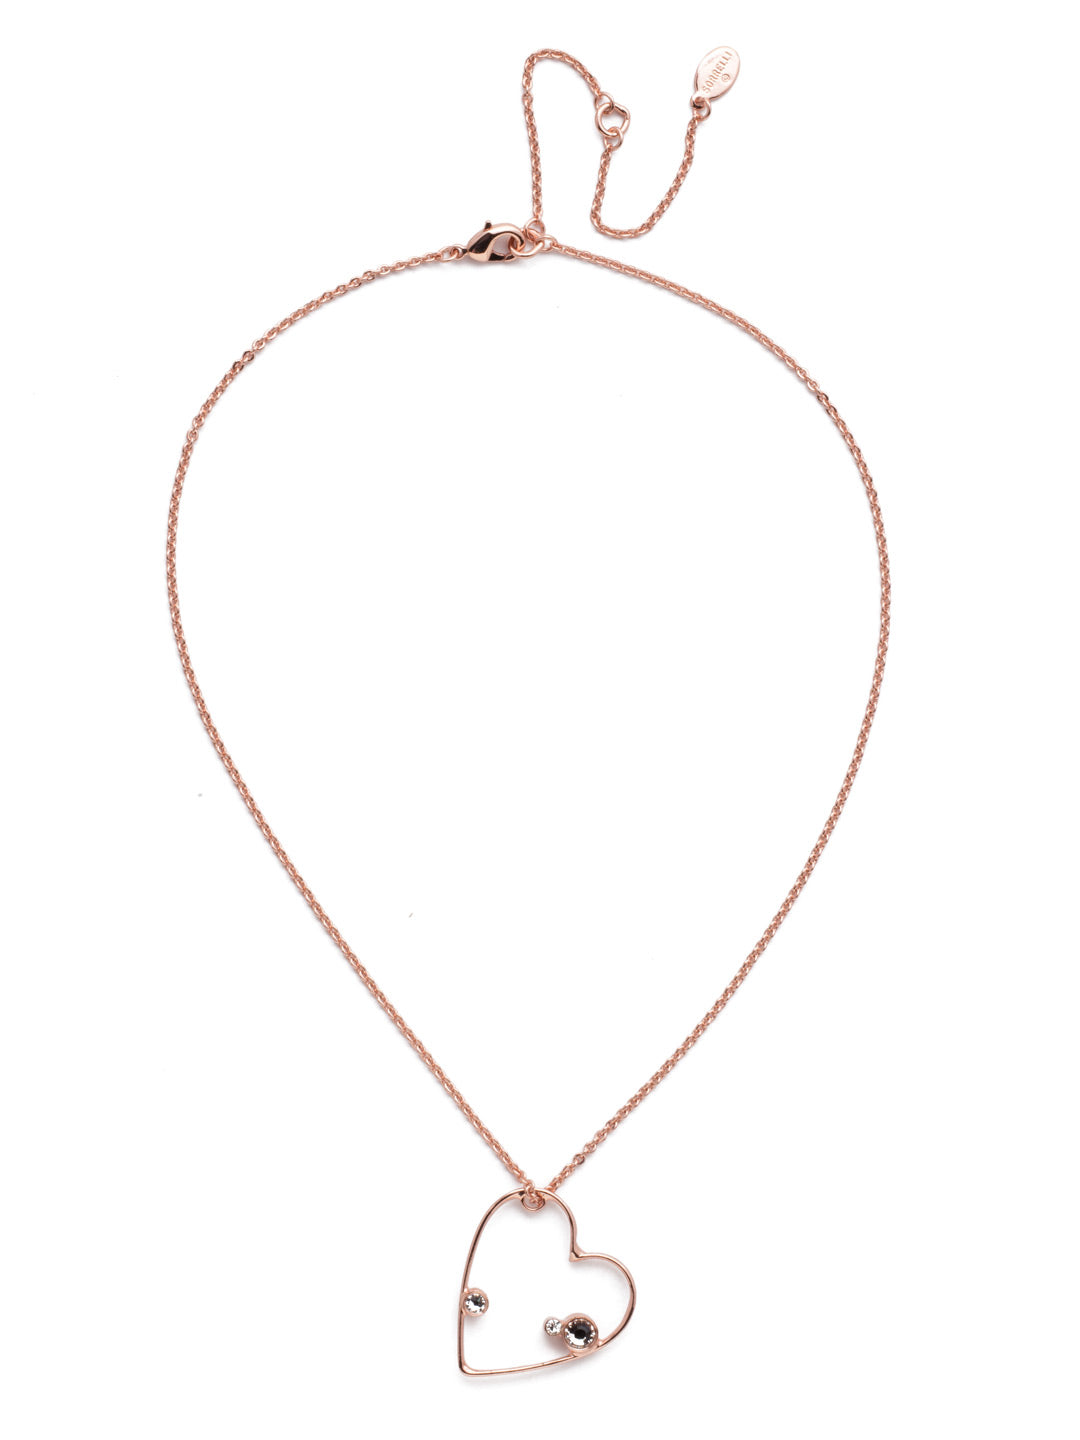 Love Pendant Necklace - NER1RGCRY - <p>For a classic everyday look honoring love, put on the Love Pendant Necklace. The heart dotted with simple circular crystals at its center is always a fit. From Sorrelli's Crystal collection in our Rose Gold-tone finish.</p>